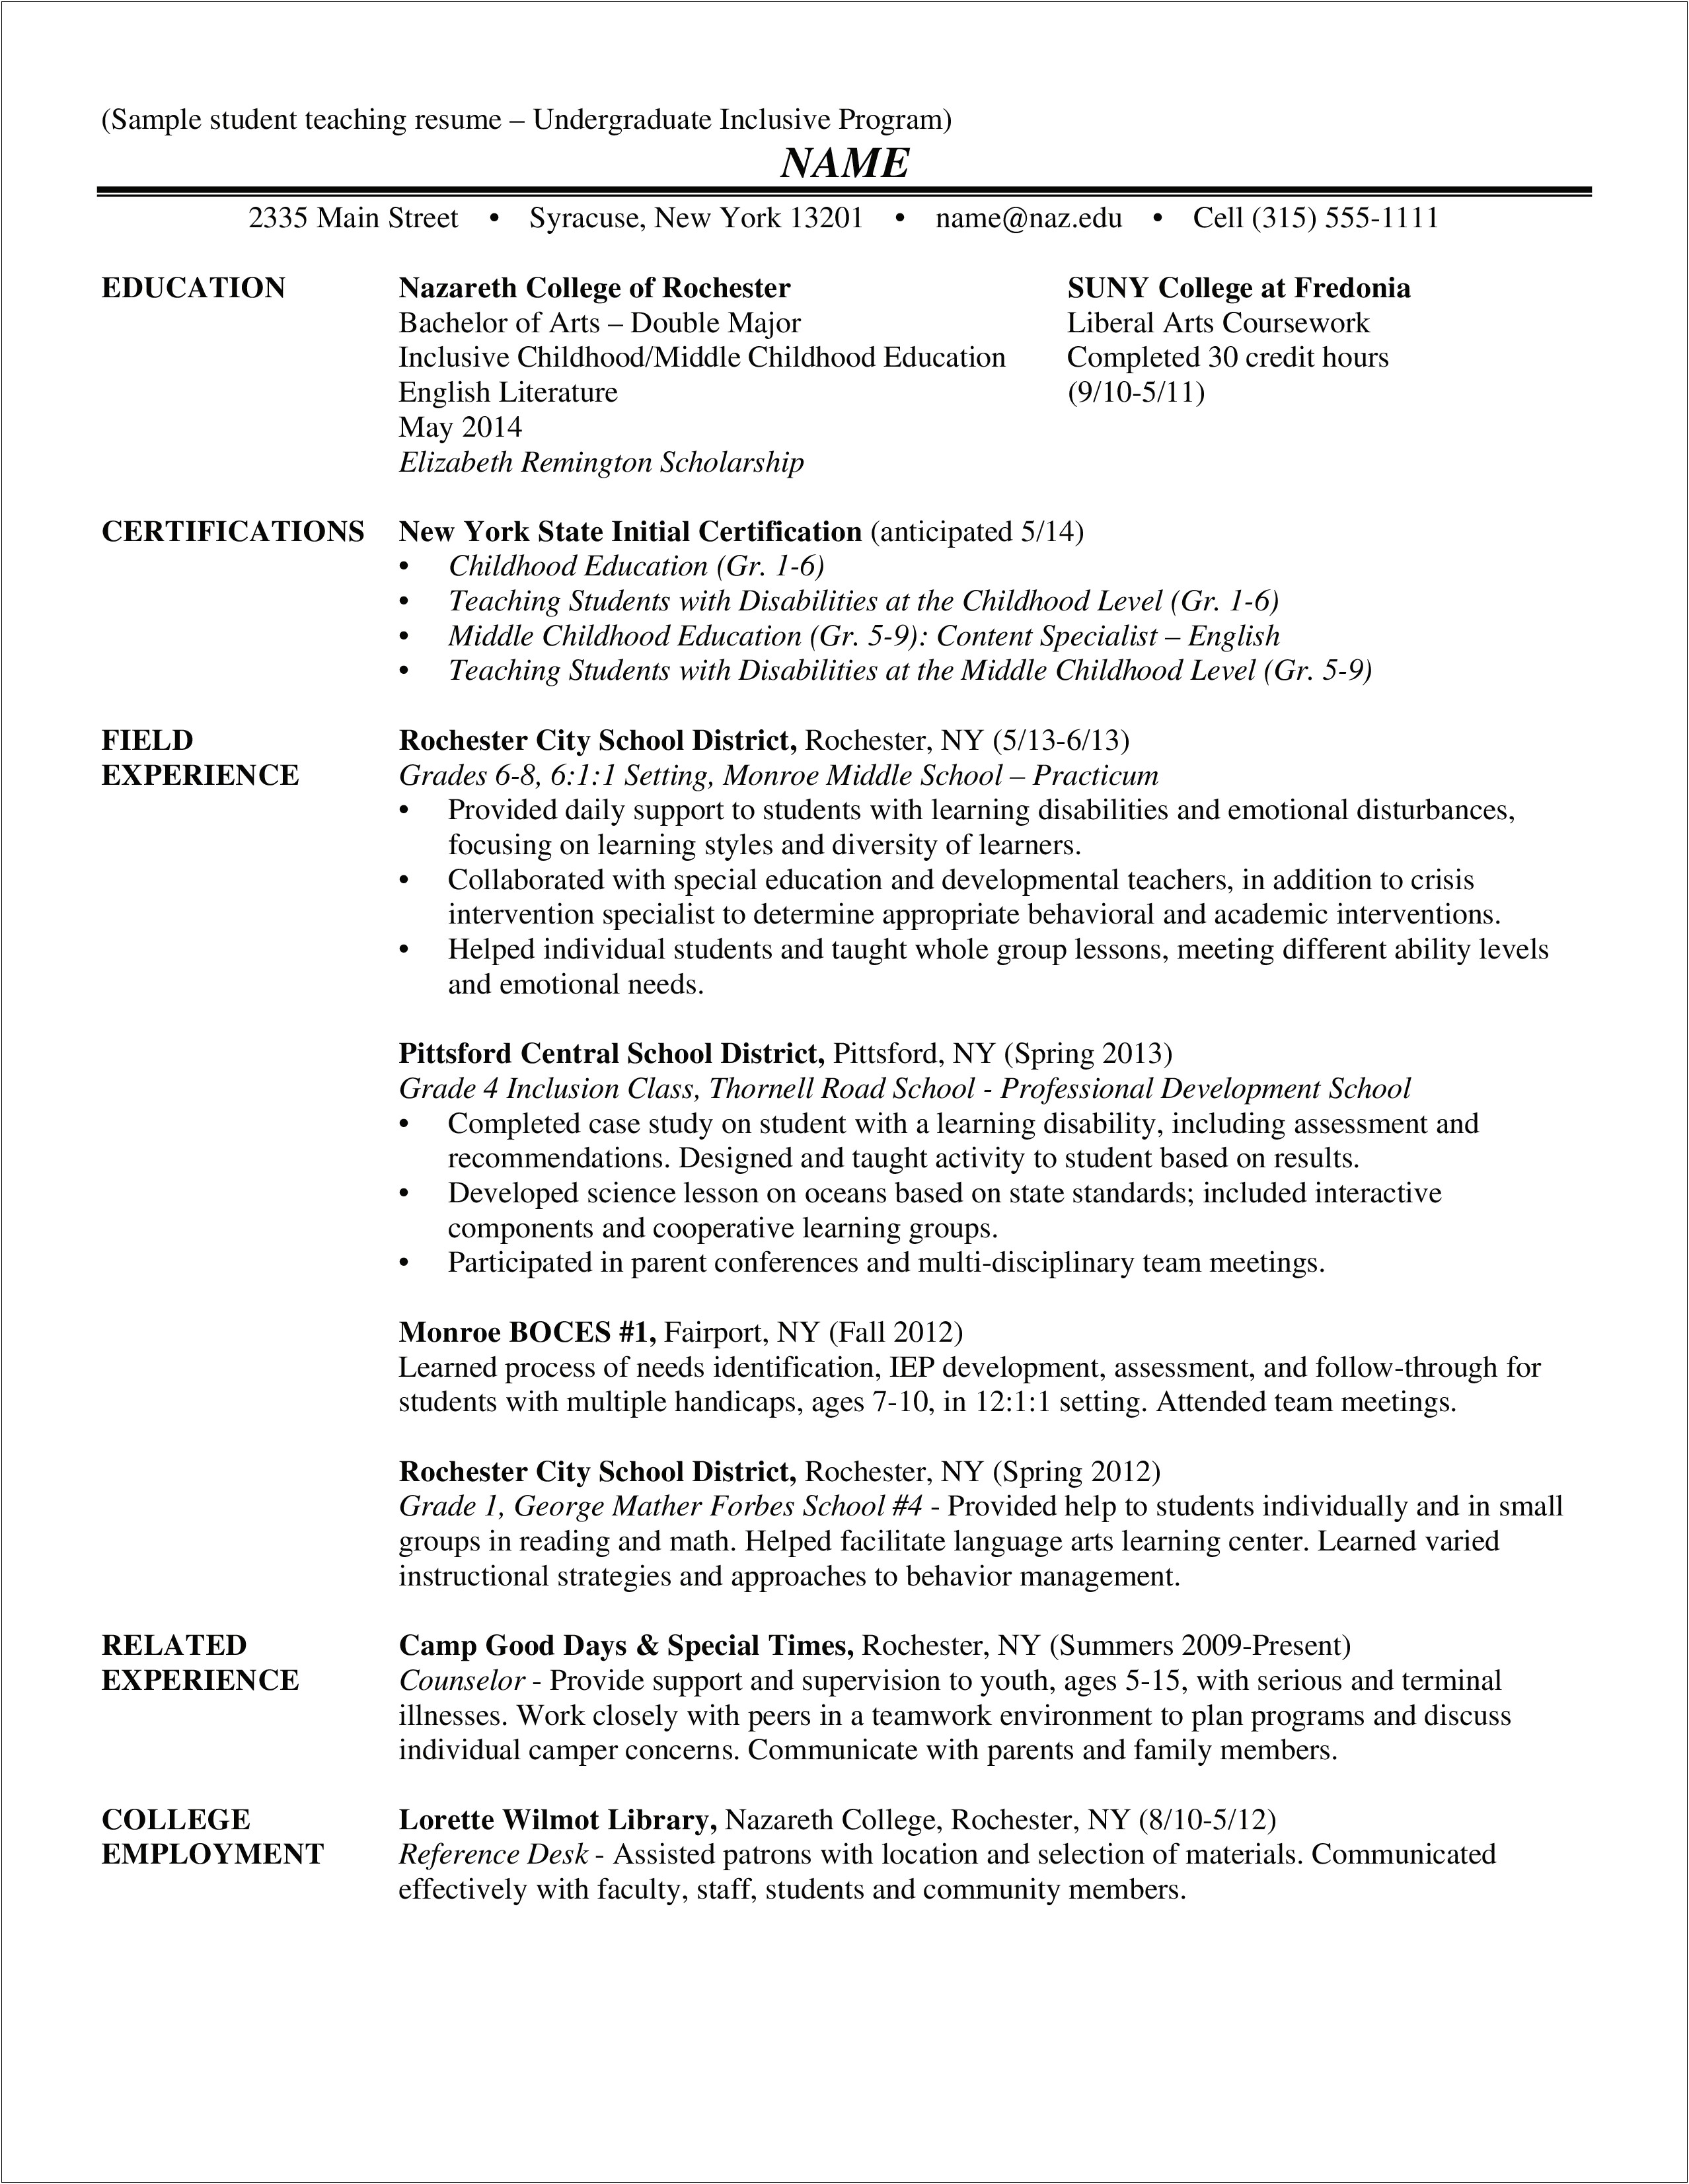 Putting A Post Baccalaureate Certification On Resume